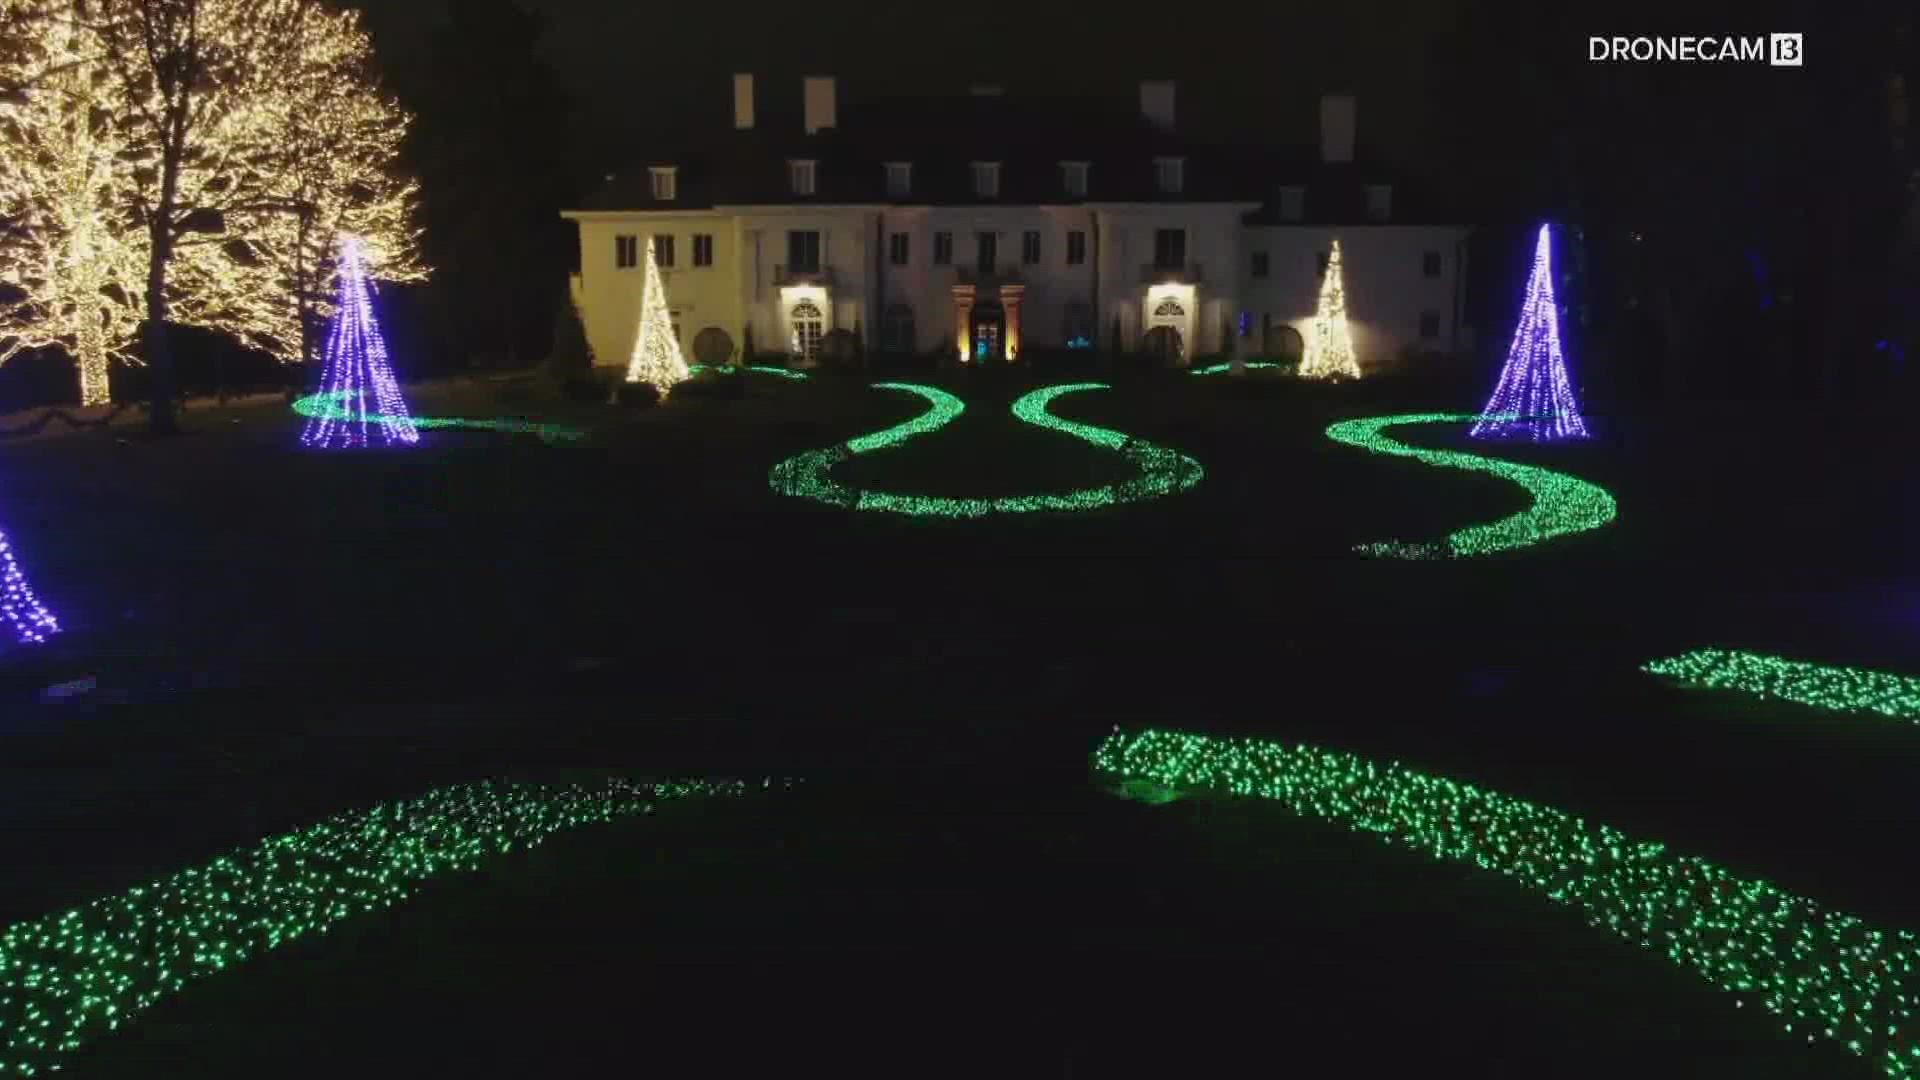 More than 1.5-million lights make up this annual display on Indy's northwest side.